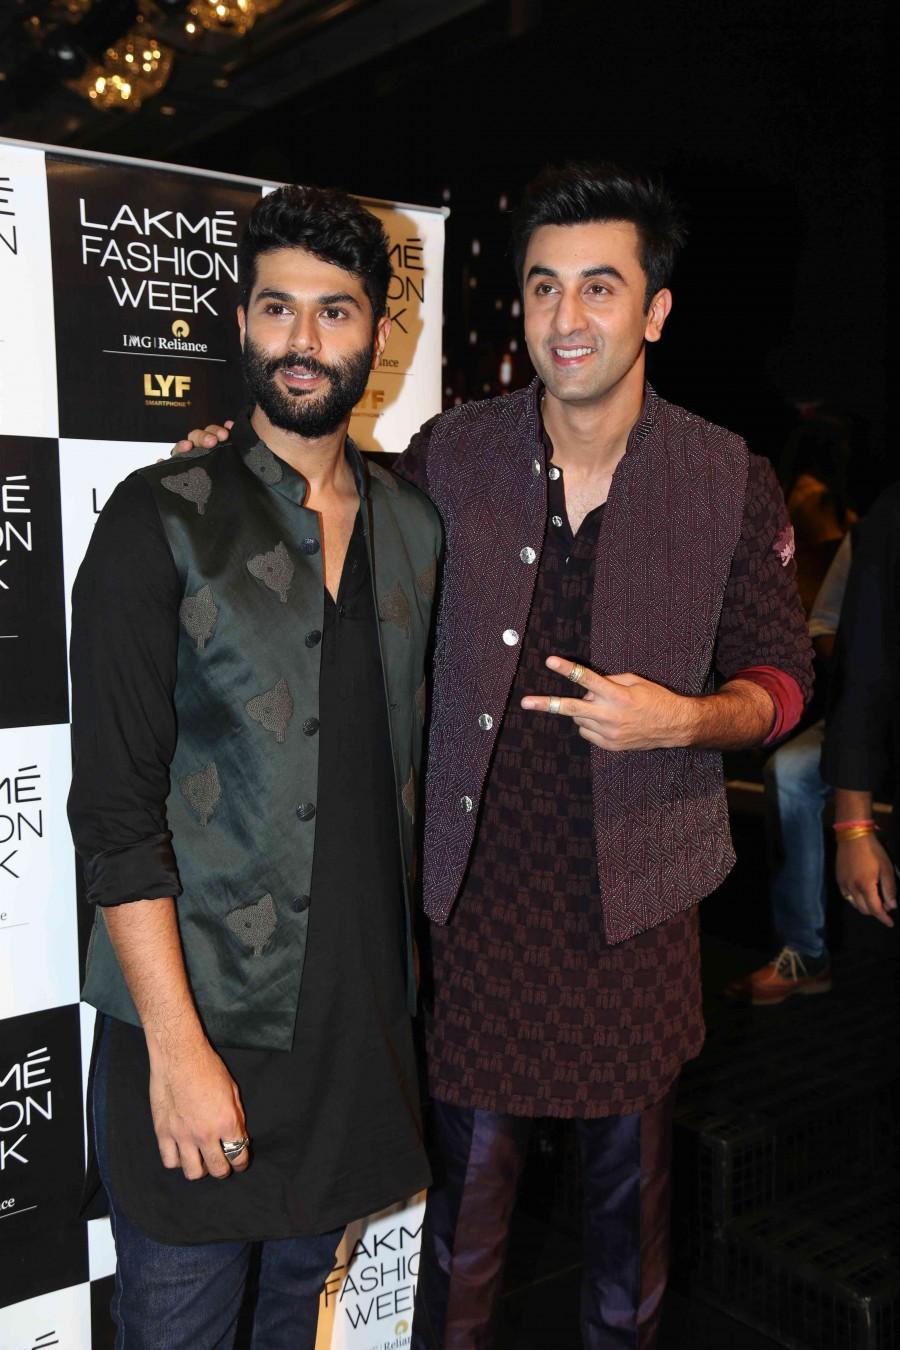 Ranbir Kapoor at ICW 2023! Actor Looks Ravishing in Shimmery Fusion Outfit  As He Turns Showstopper for Kunal Rawal (View Pics and Video)